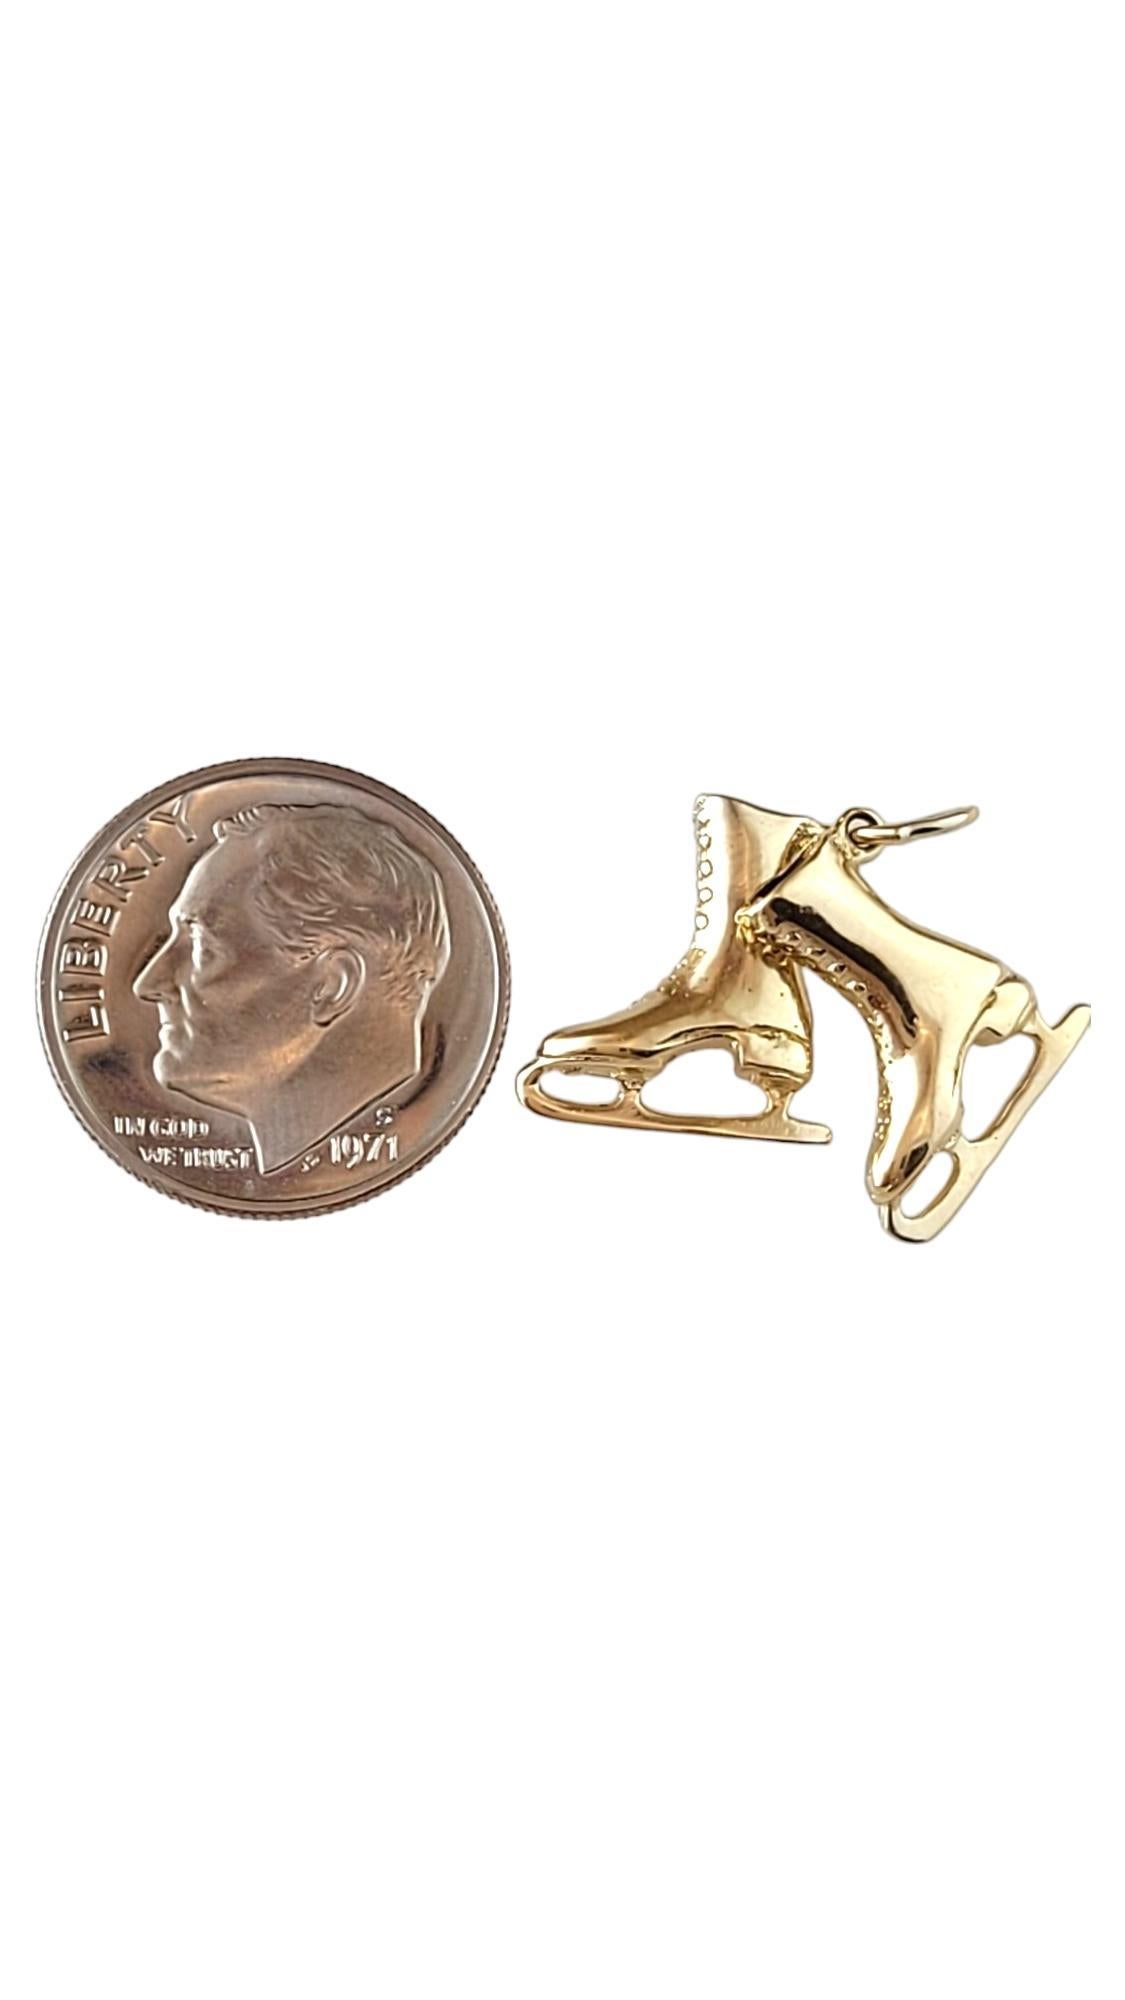 14K Yellow Gold Ice Skates Charm #16901 For Sale 2